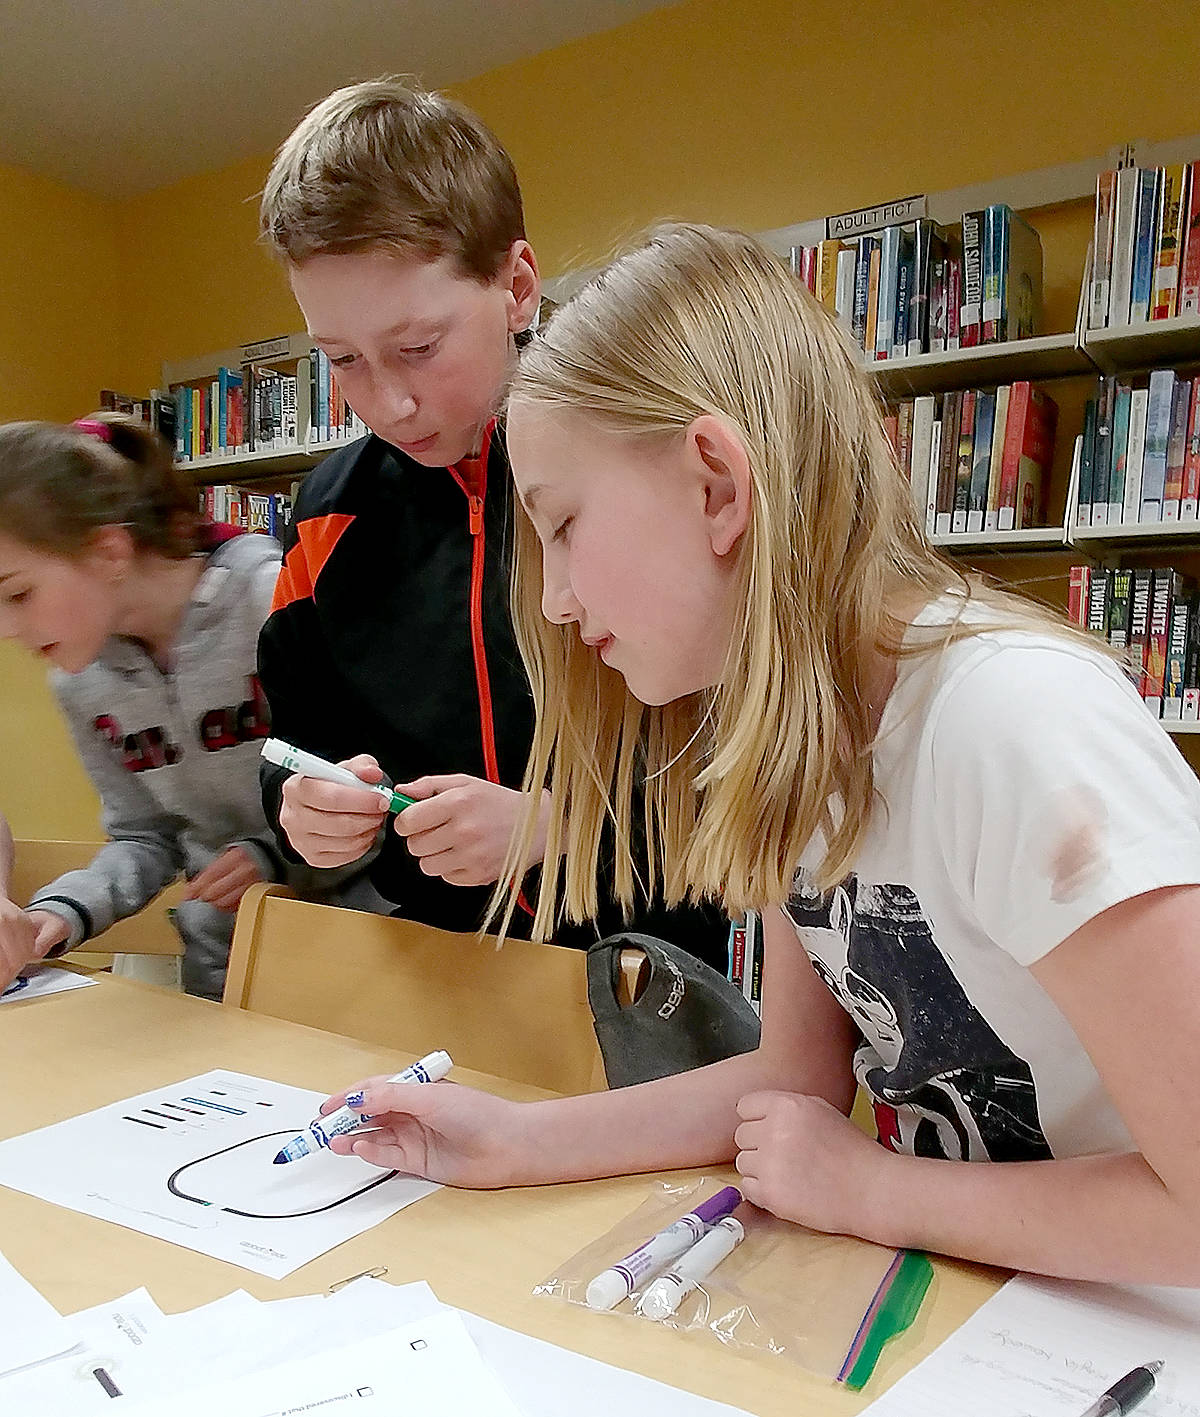 16509759_web1_Ozobots-at-Library-Elli-Pic2